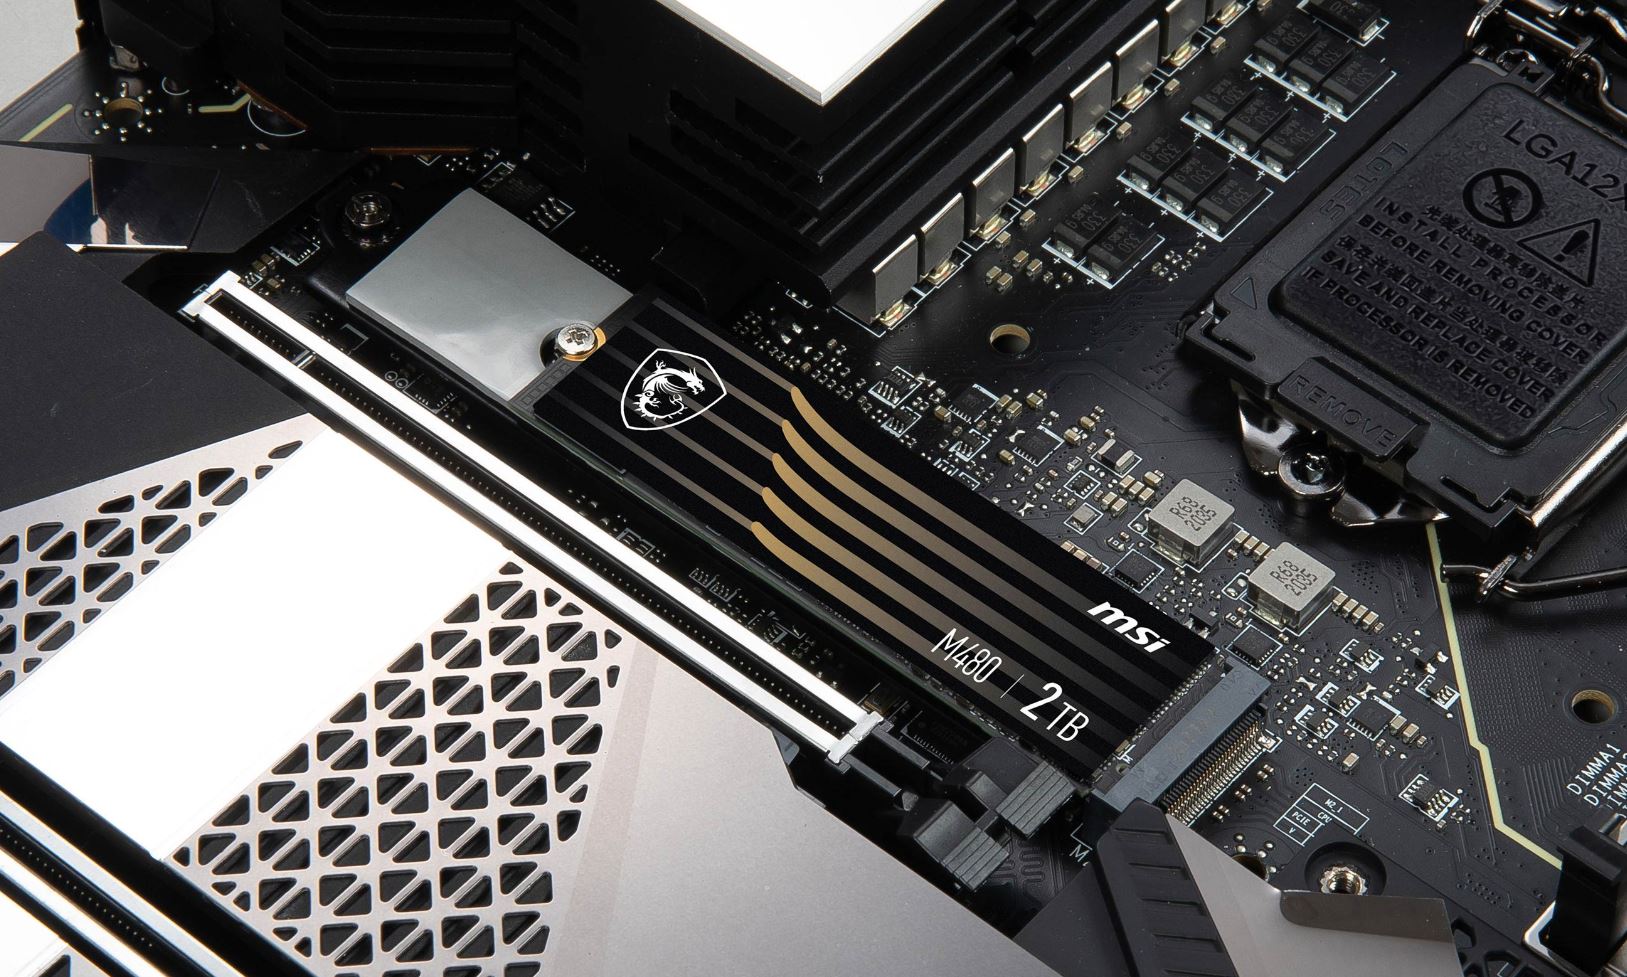 MSI Spatium M480 M.2 NVMe SSD Review: Classy Looks and Speed